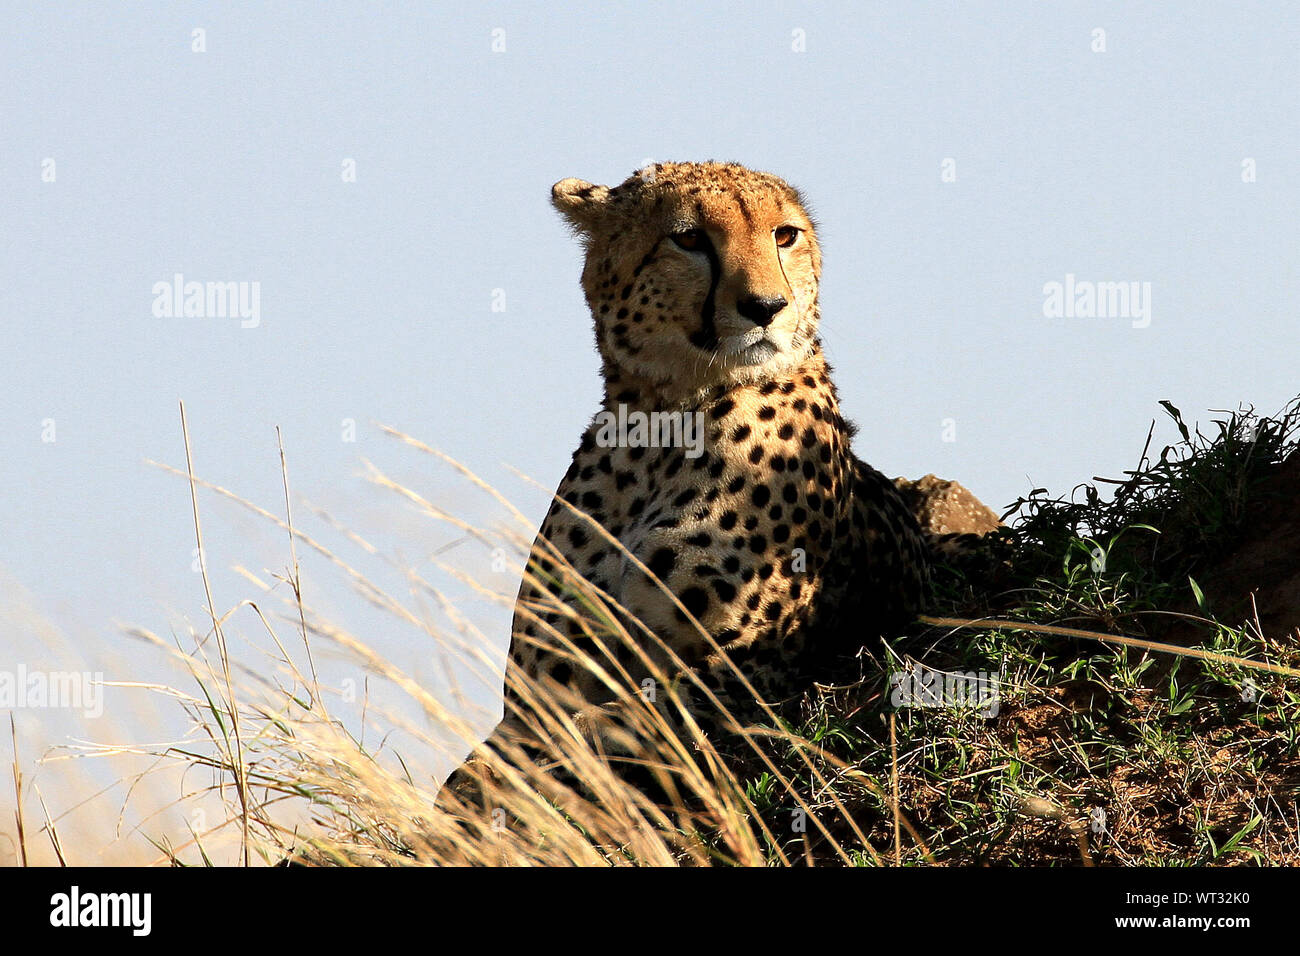 View Of Cheetah Against Sky Stock Photo